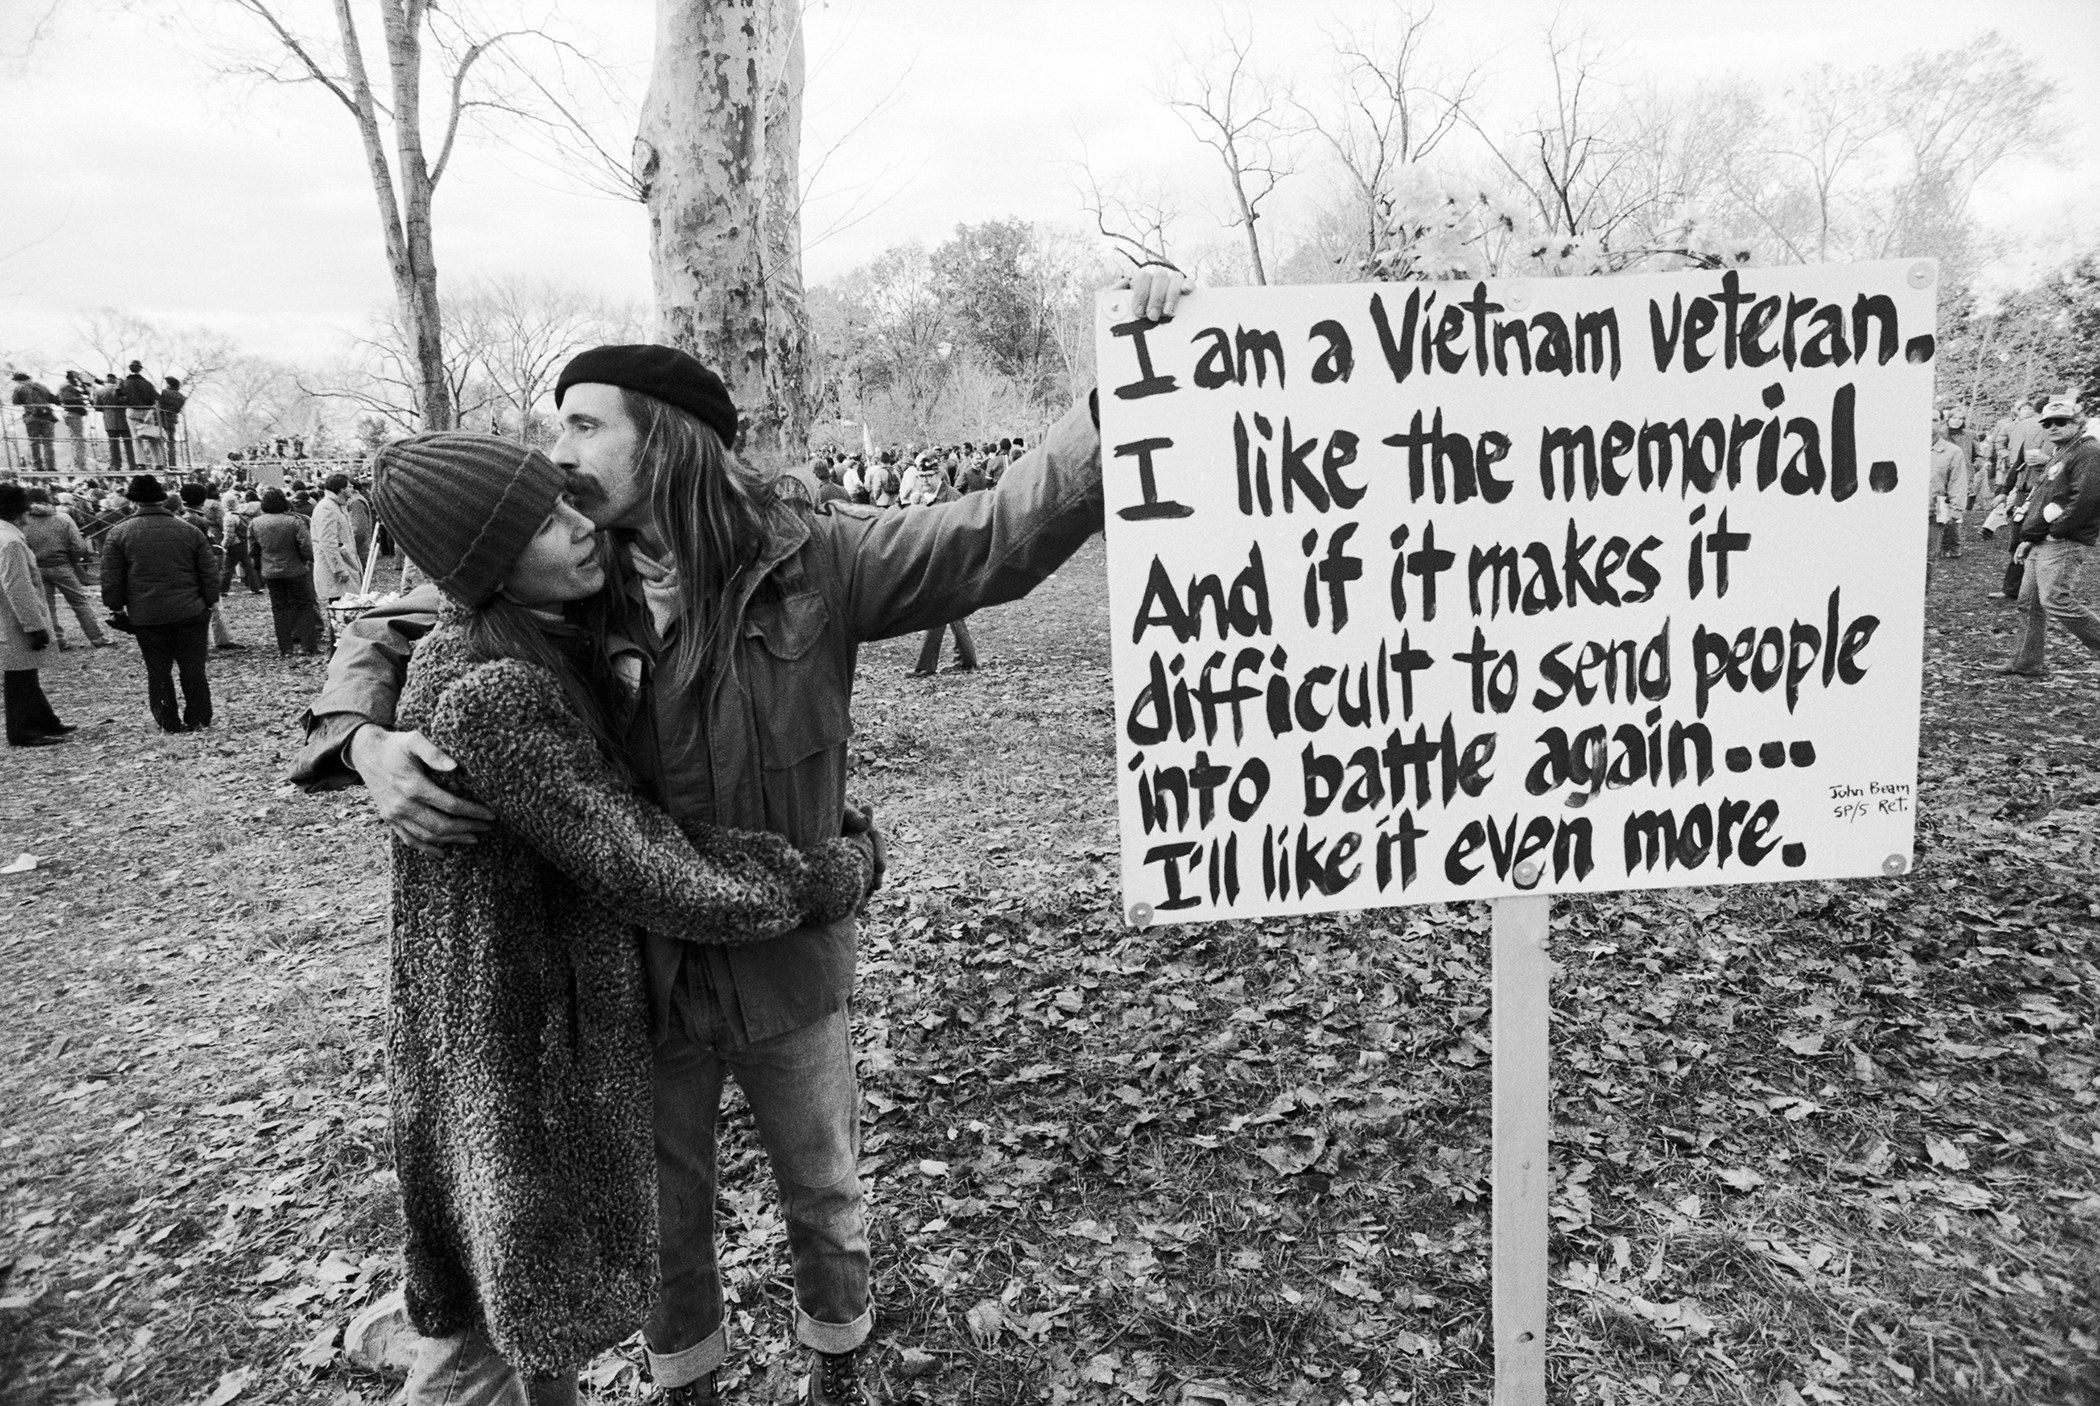 Heres How Americans First Reacted To The Vietnam Veterans Memorial